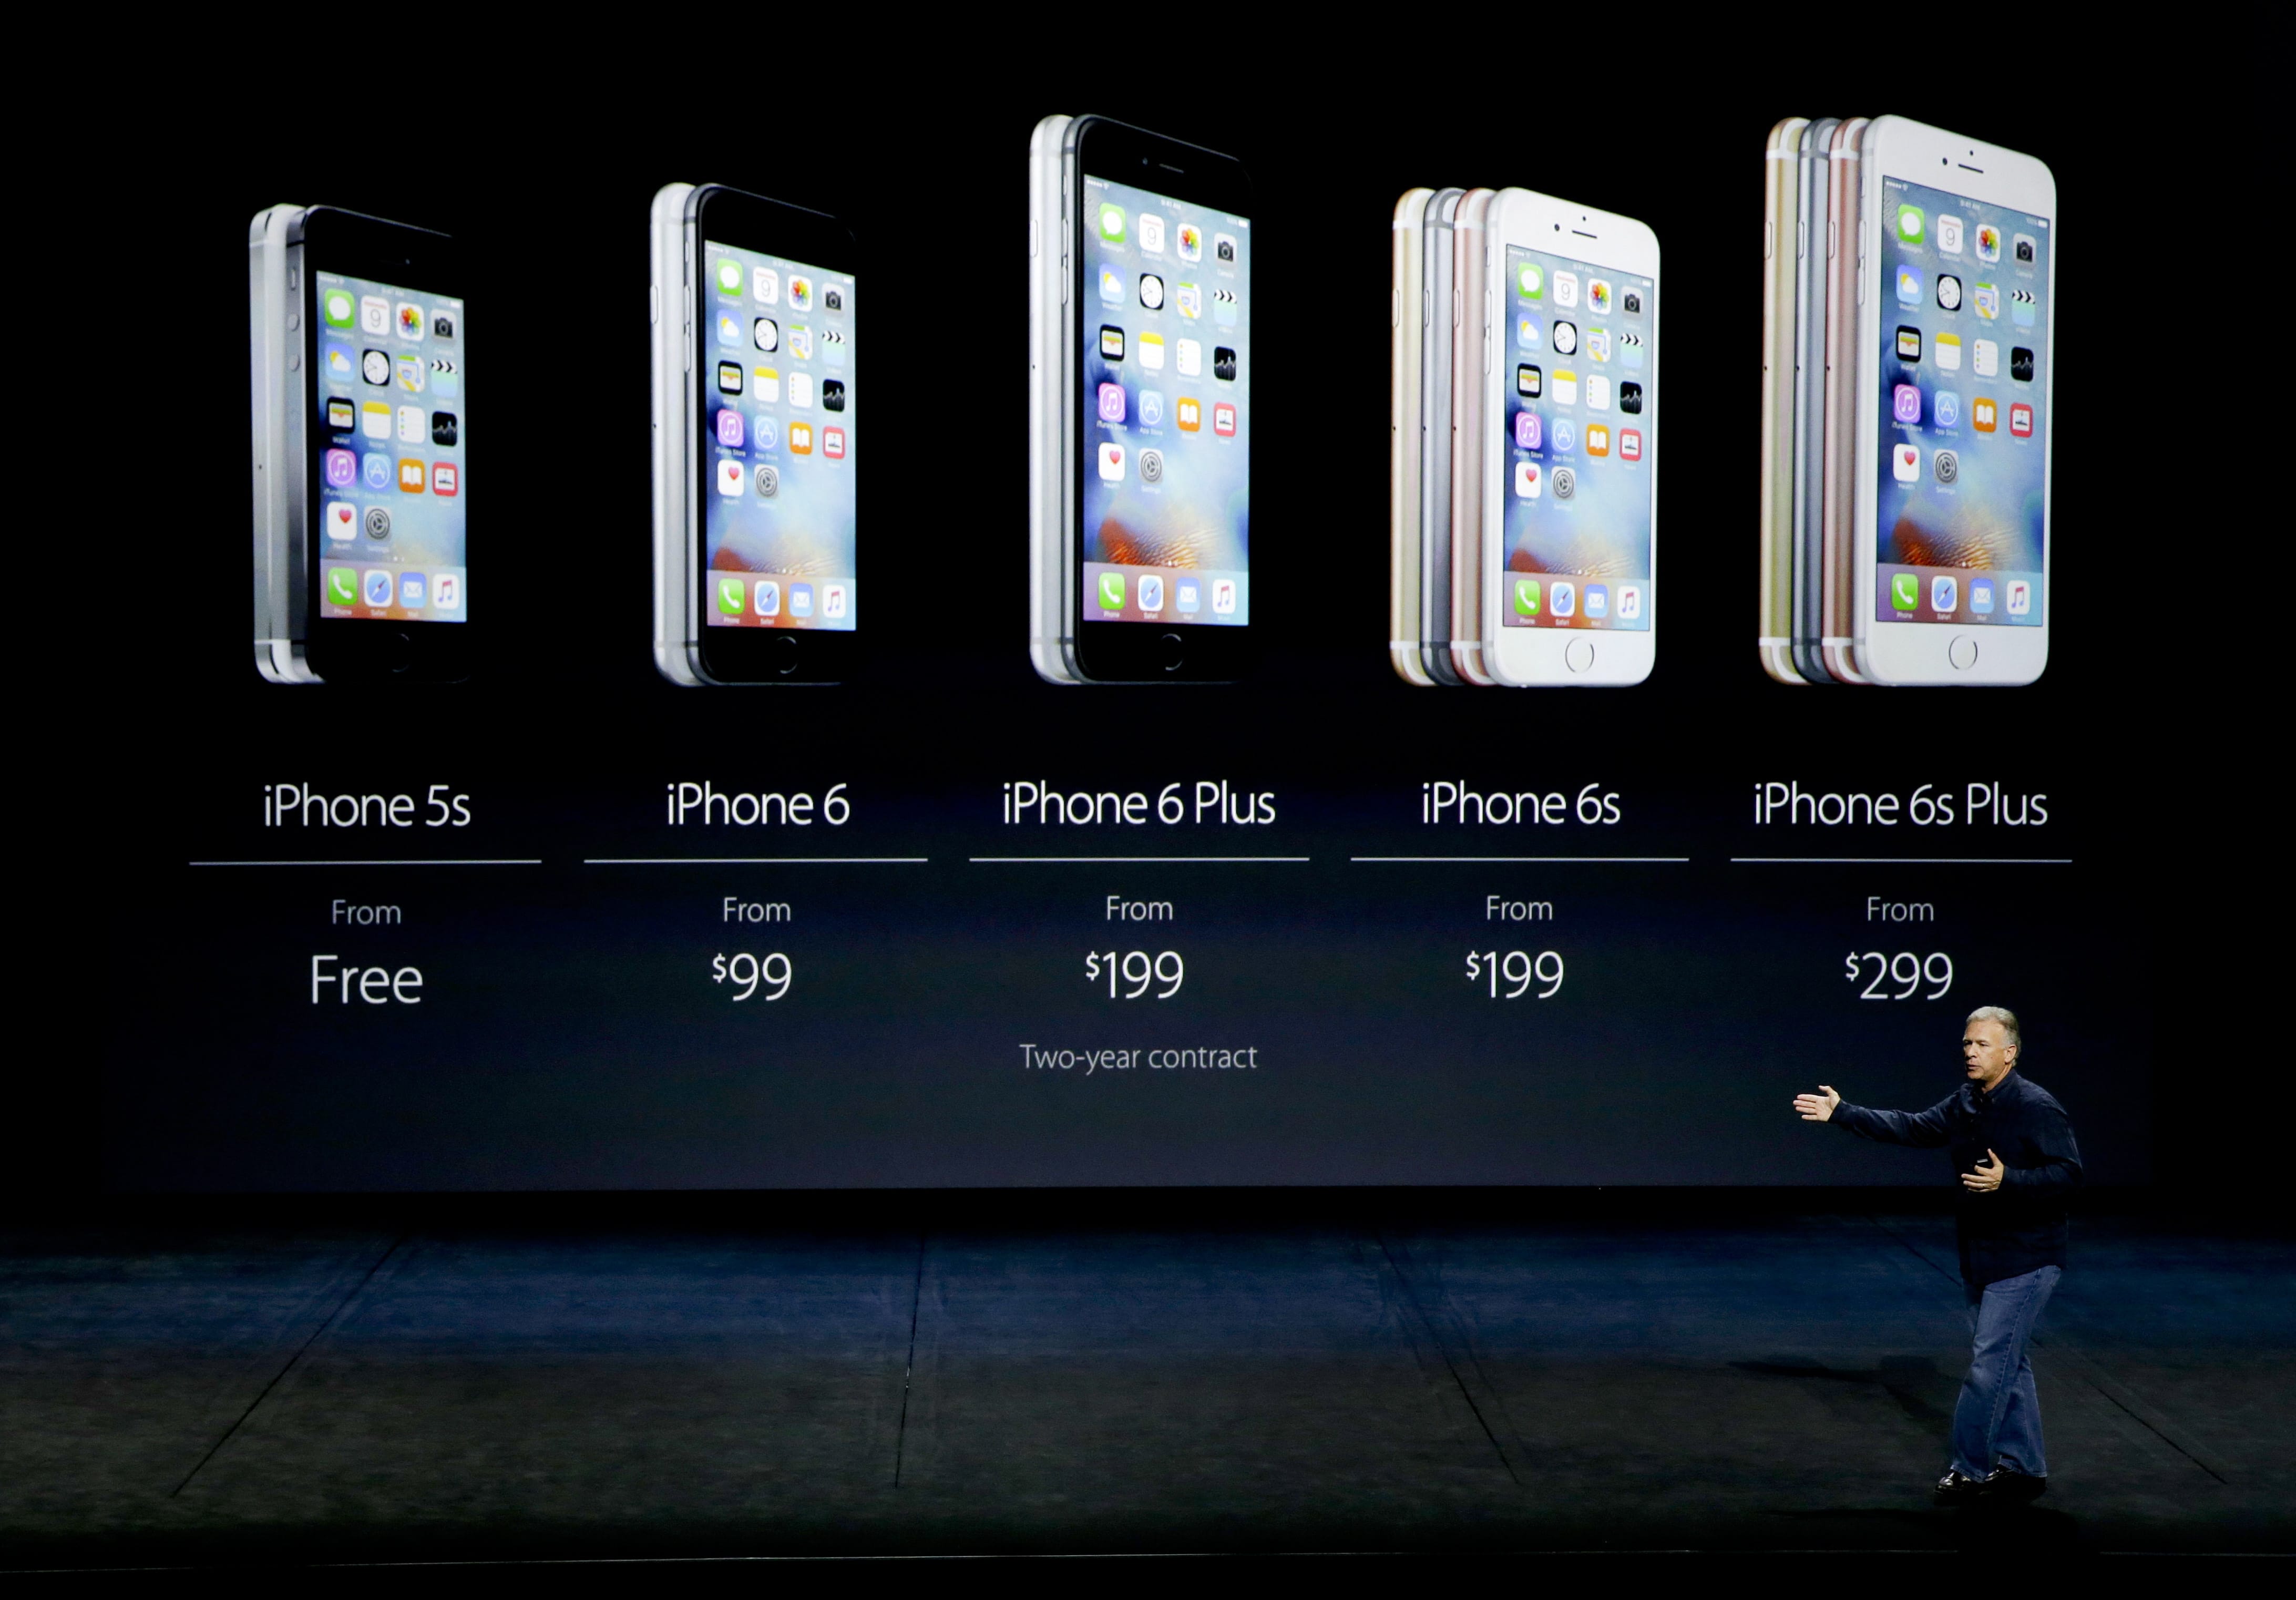 Phil Schiller, Apple's senior vice president of worldwide marketing, talks about the pricing of the new iPhone 6s and iPhone 6s Plus during the Apple event at the Bill Graham Civic Auditorium in San Francisco on Wednesday.